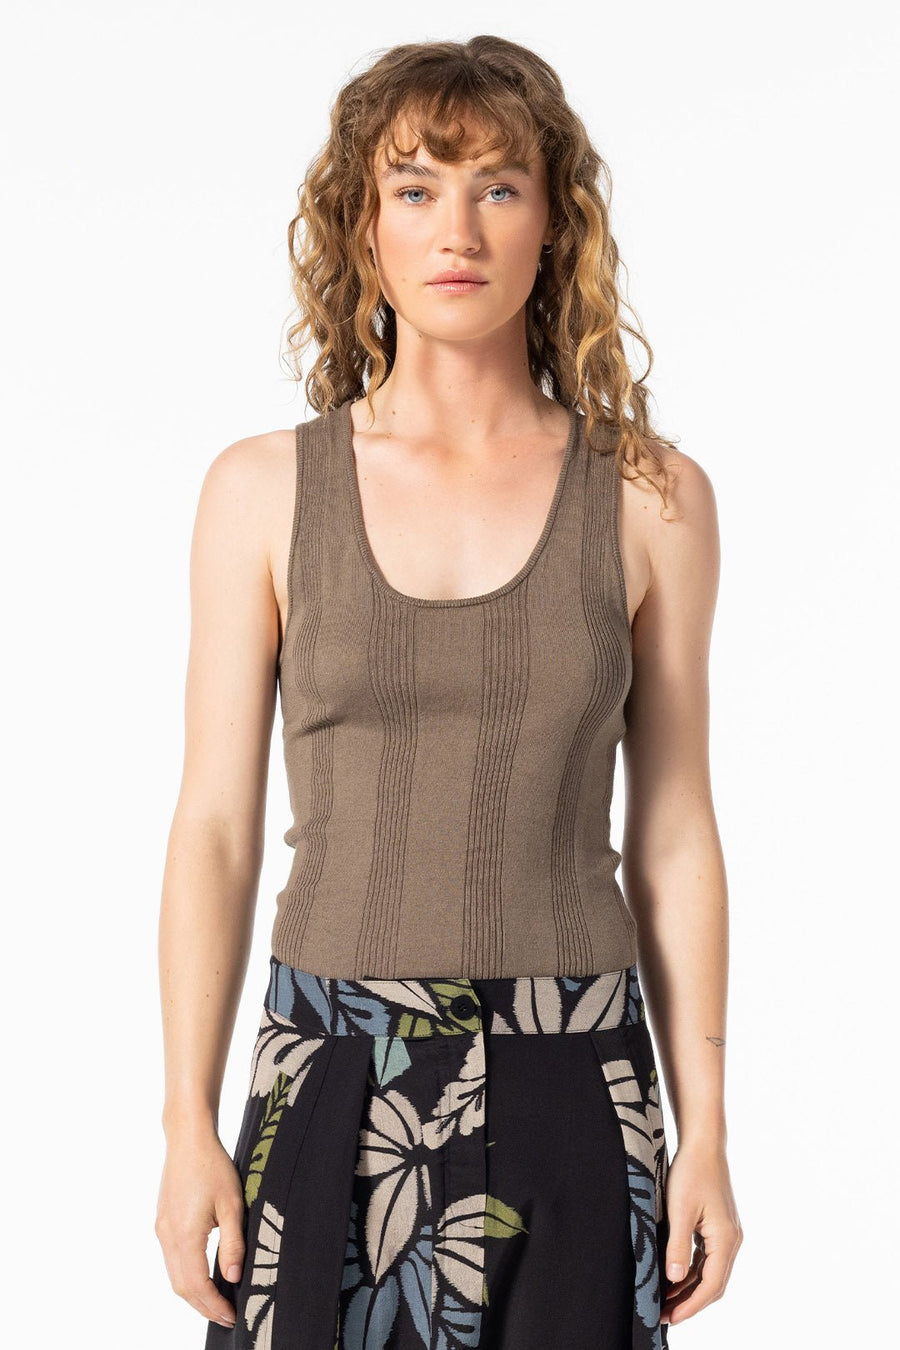 HONEYCOMB KNIT CAMI, CYPRESS - Burning Torch Online Boutique